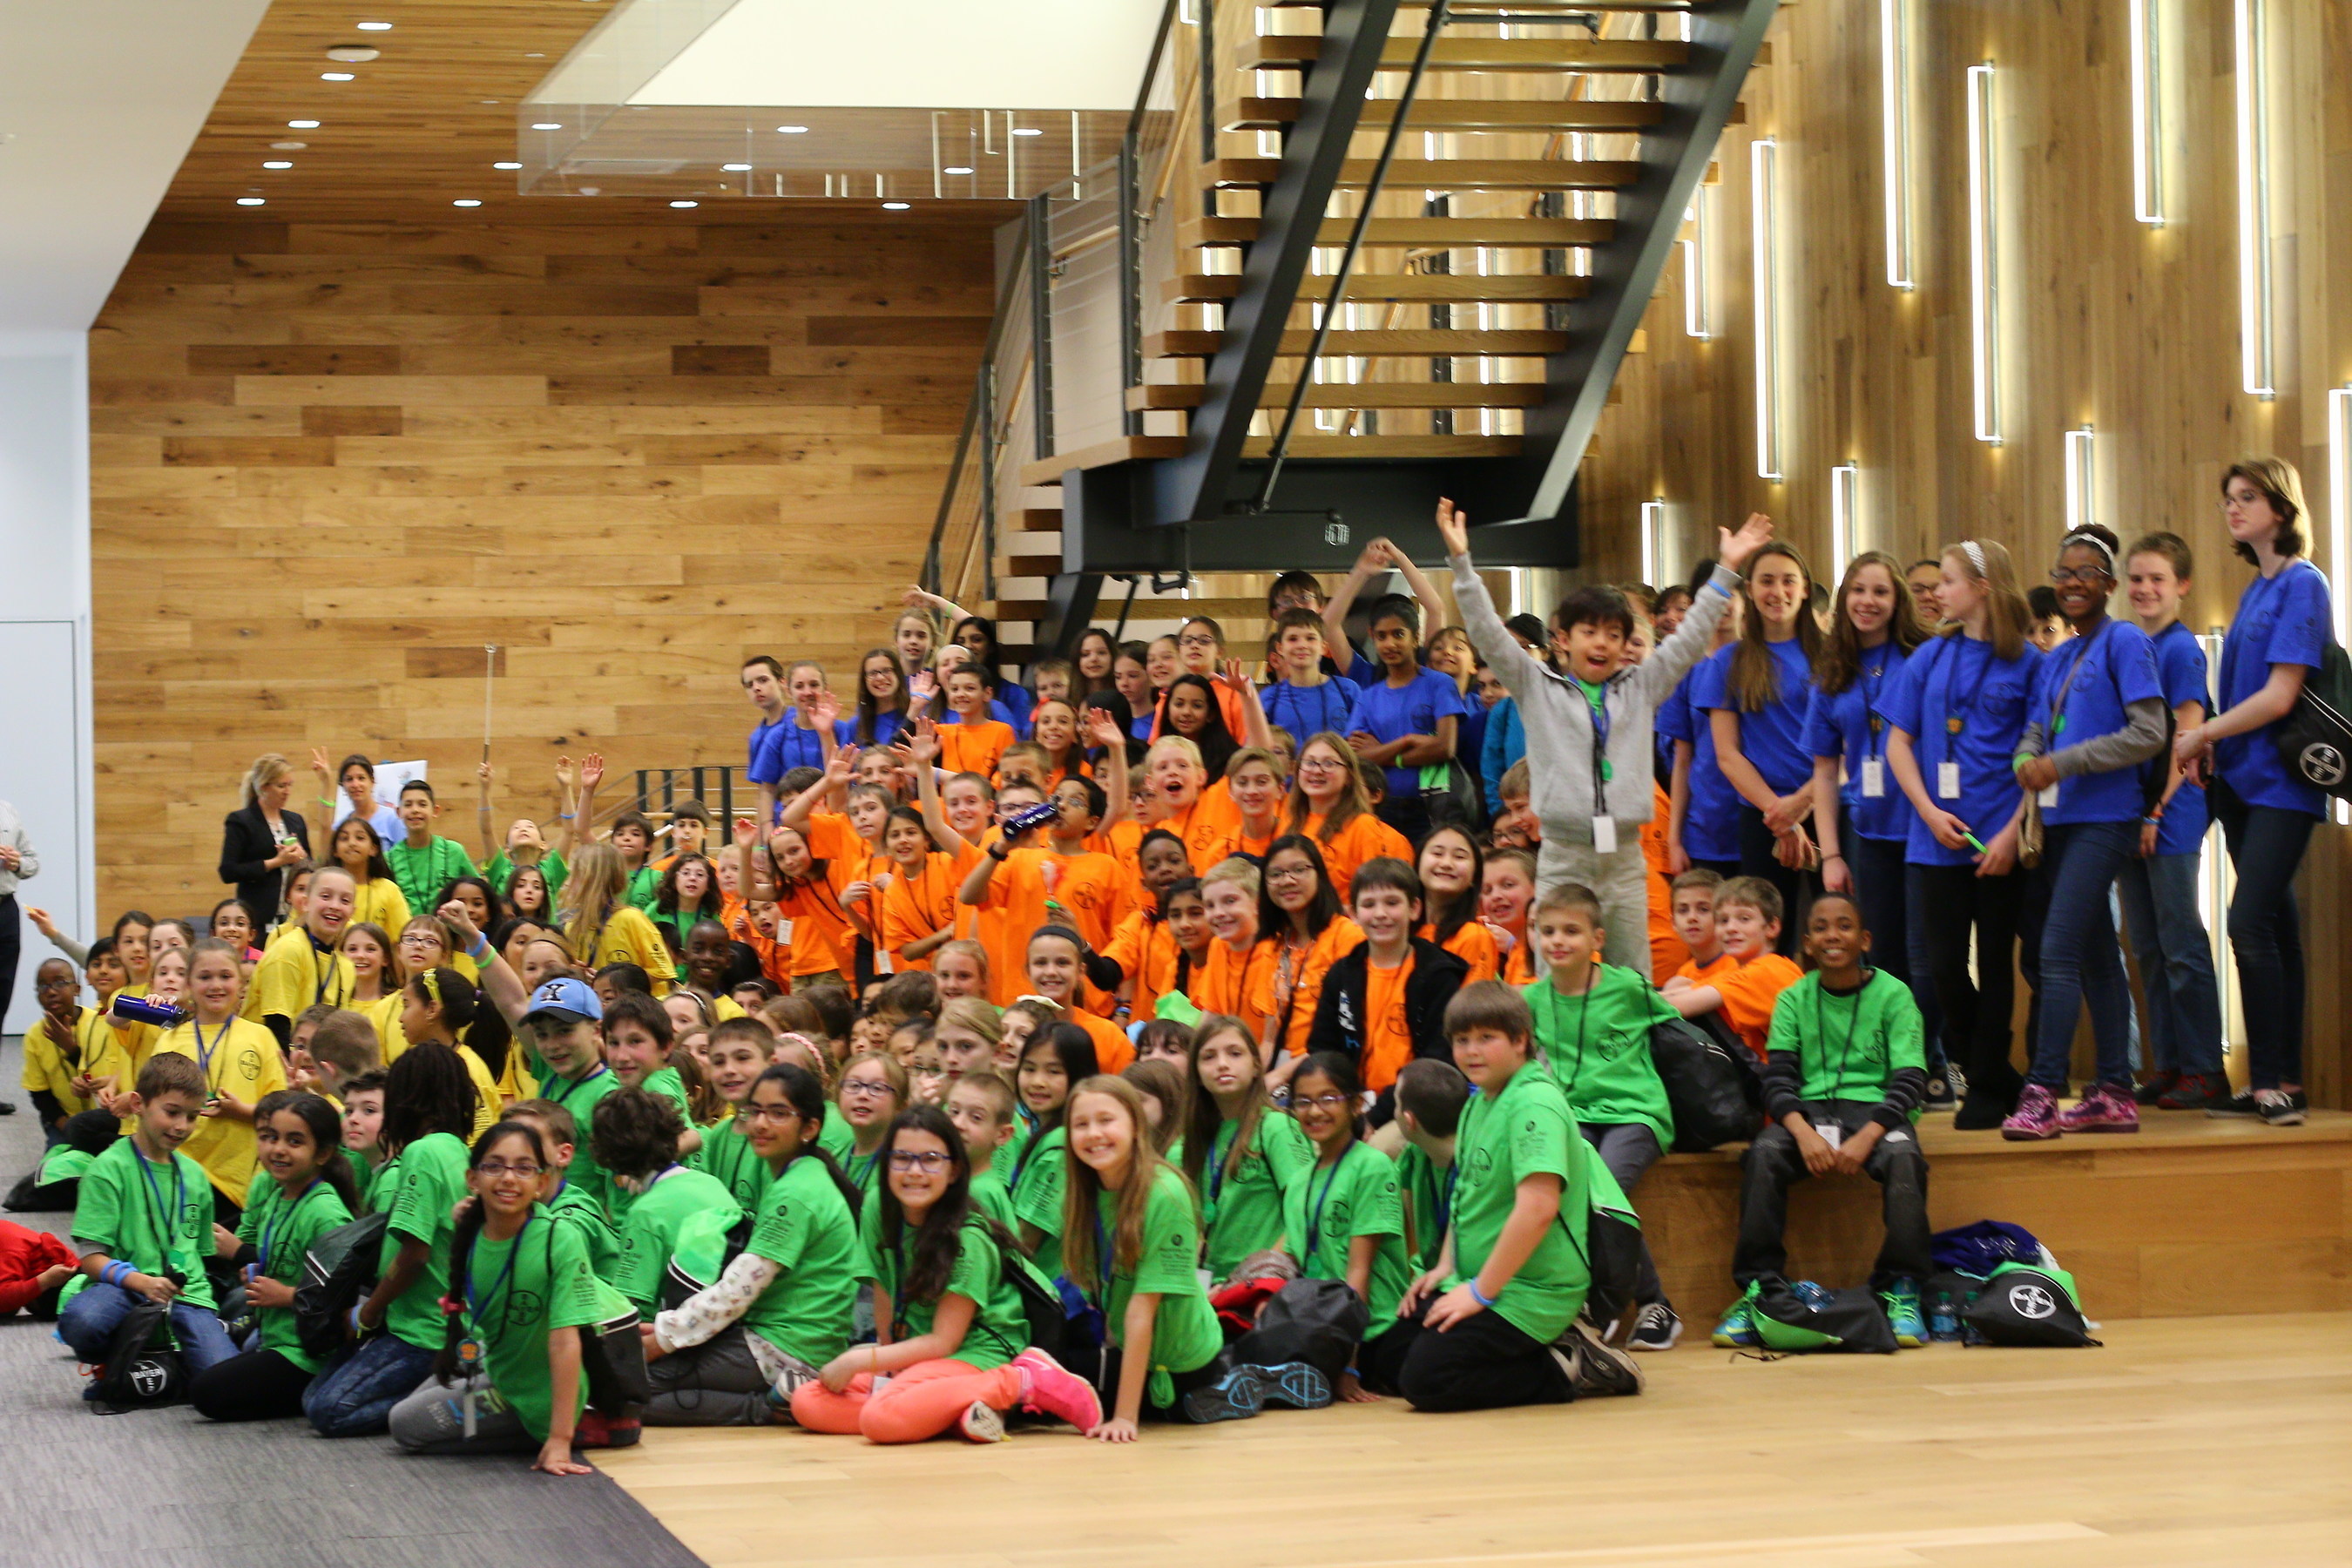 Bayer Hosts over 200 children at Take Your Child To Work Day